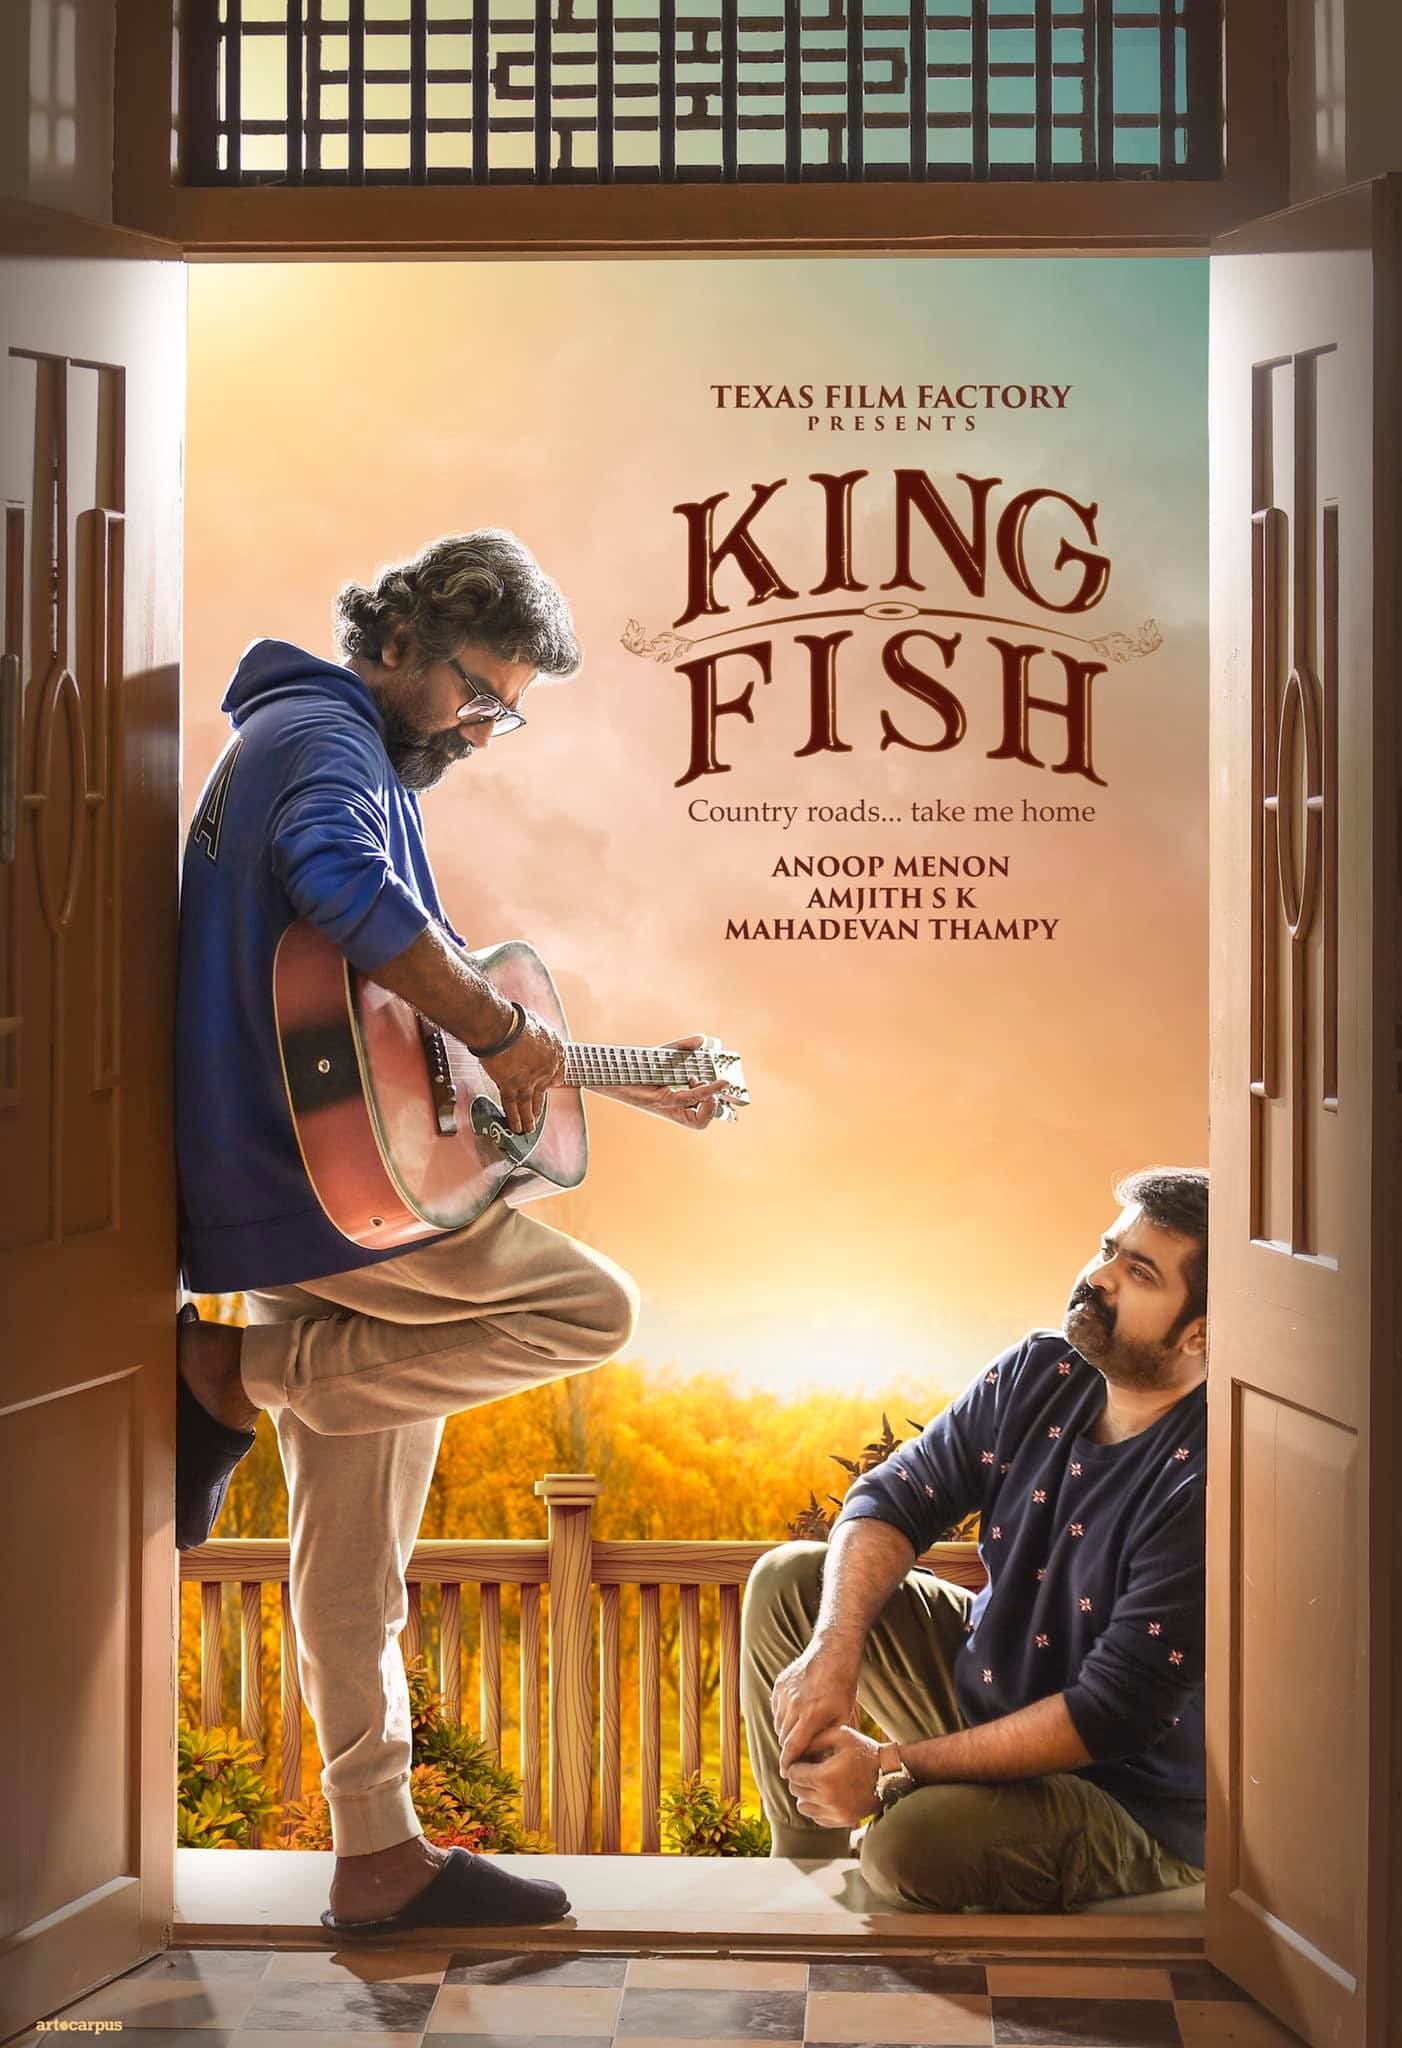 King Fish Movie Review | King Fish Filmy Rating 2022